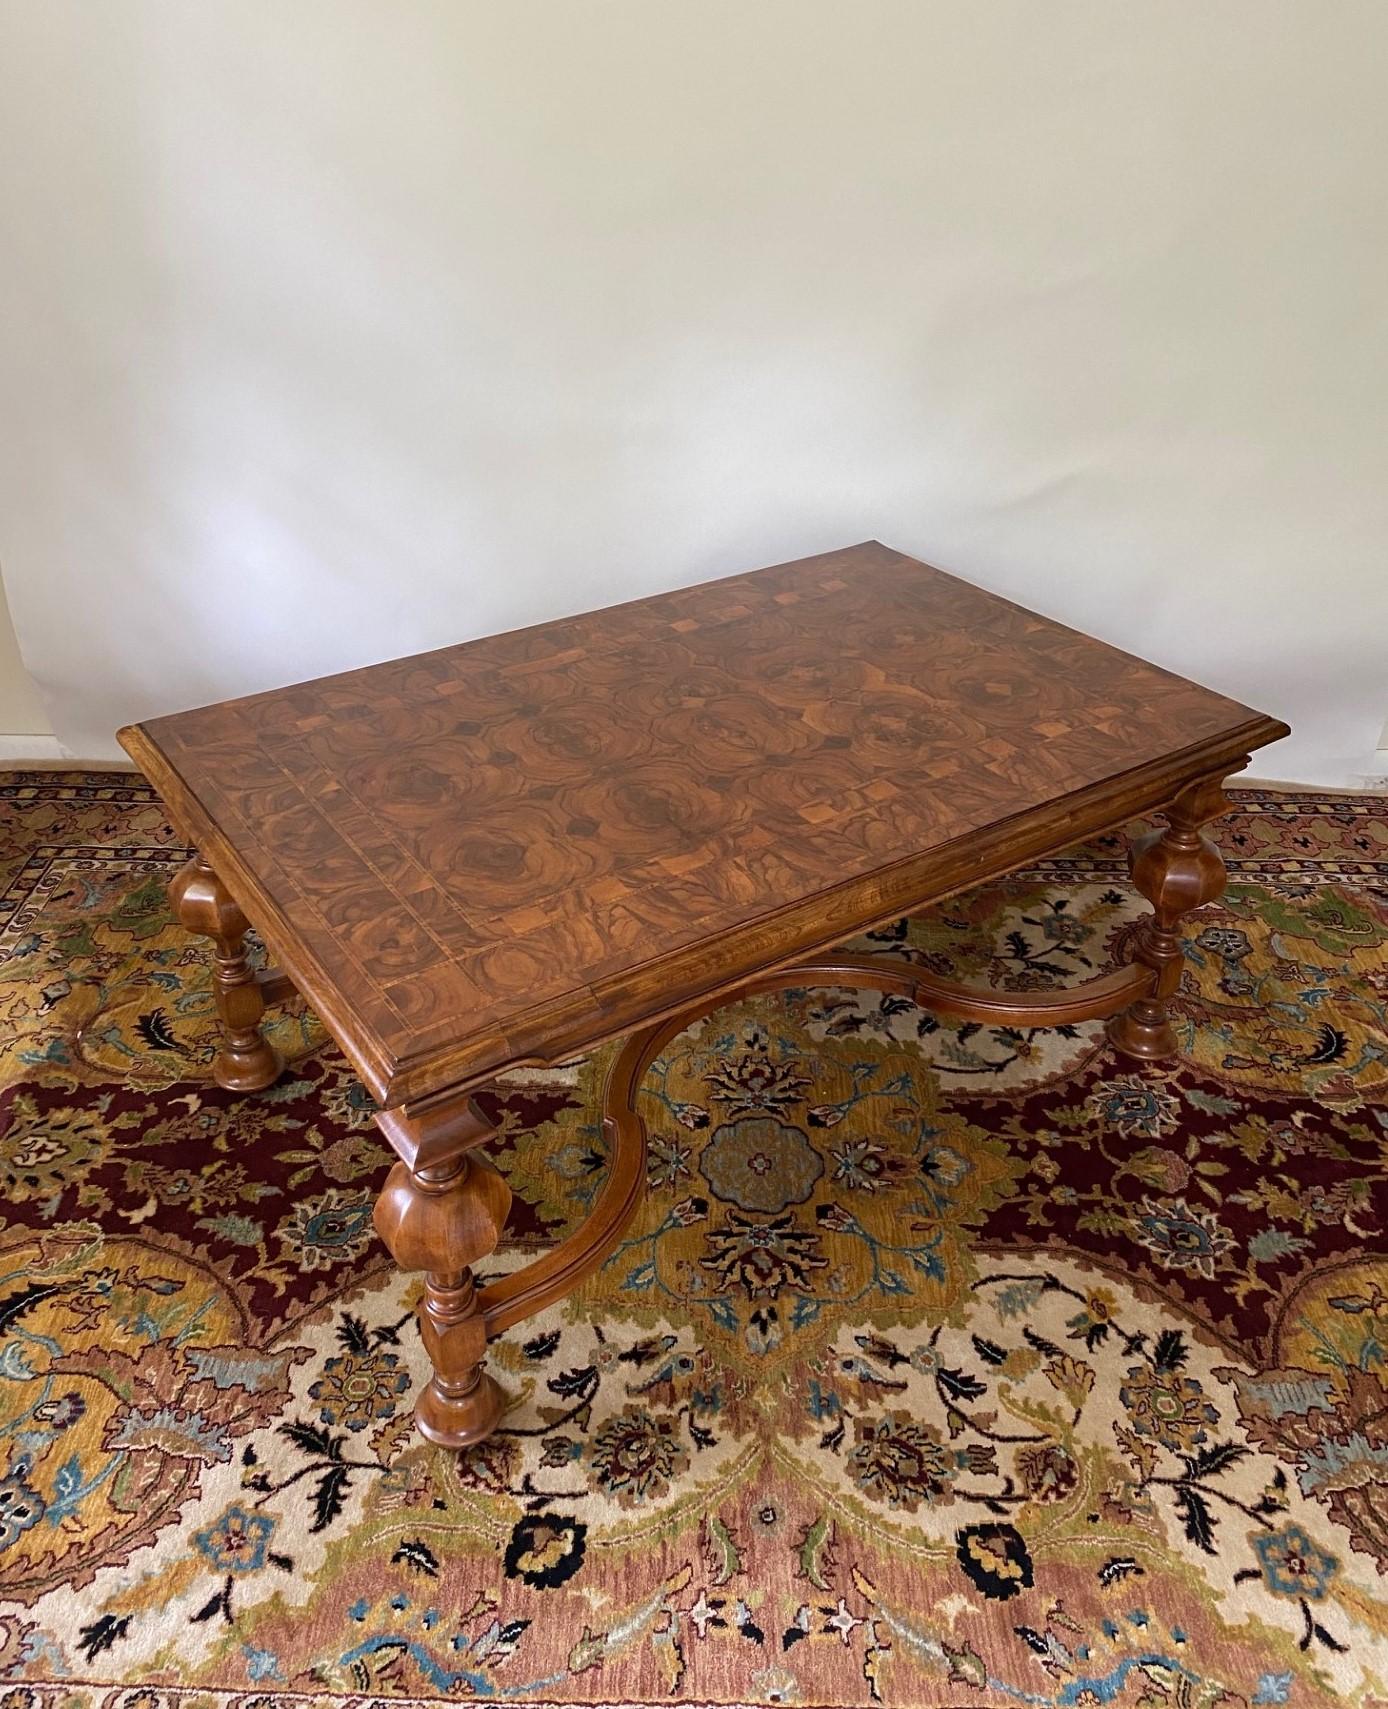 This New William & Mary style English bench-made Walnut rectangular coffee table is a stunning piece of furniture that exudes elegance and craftsmanship. It features a combination of exquisite materials and intricate design elements.

The table's